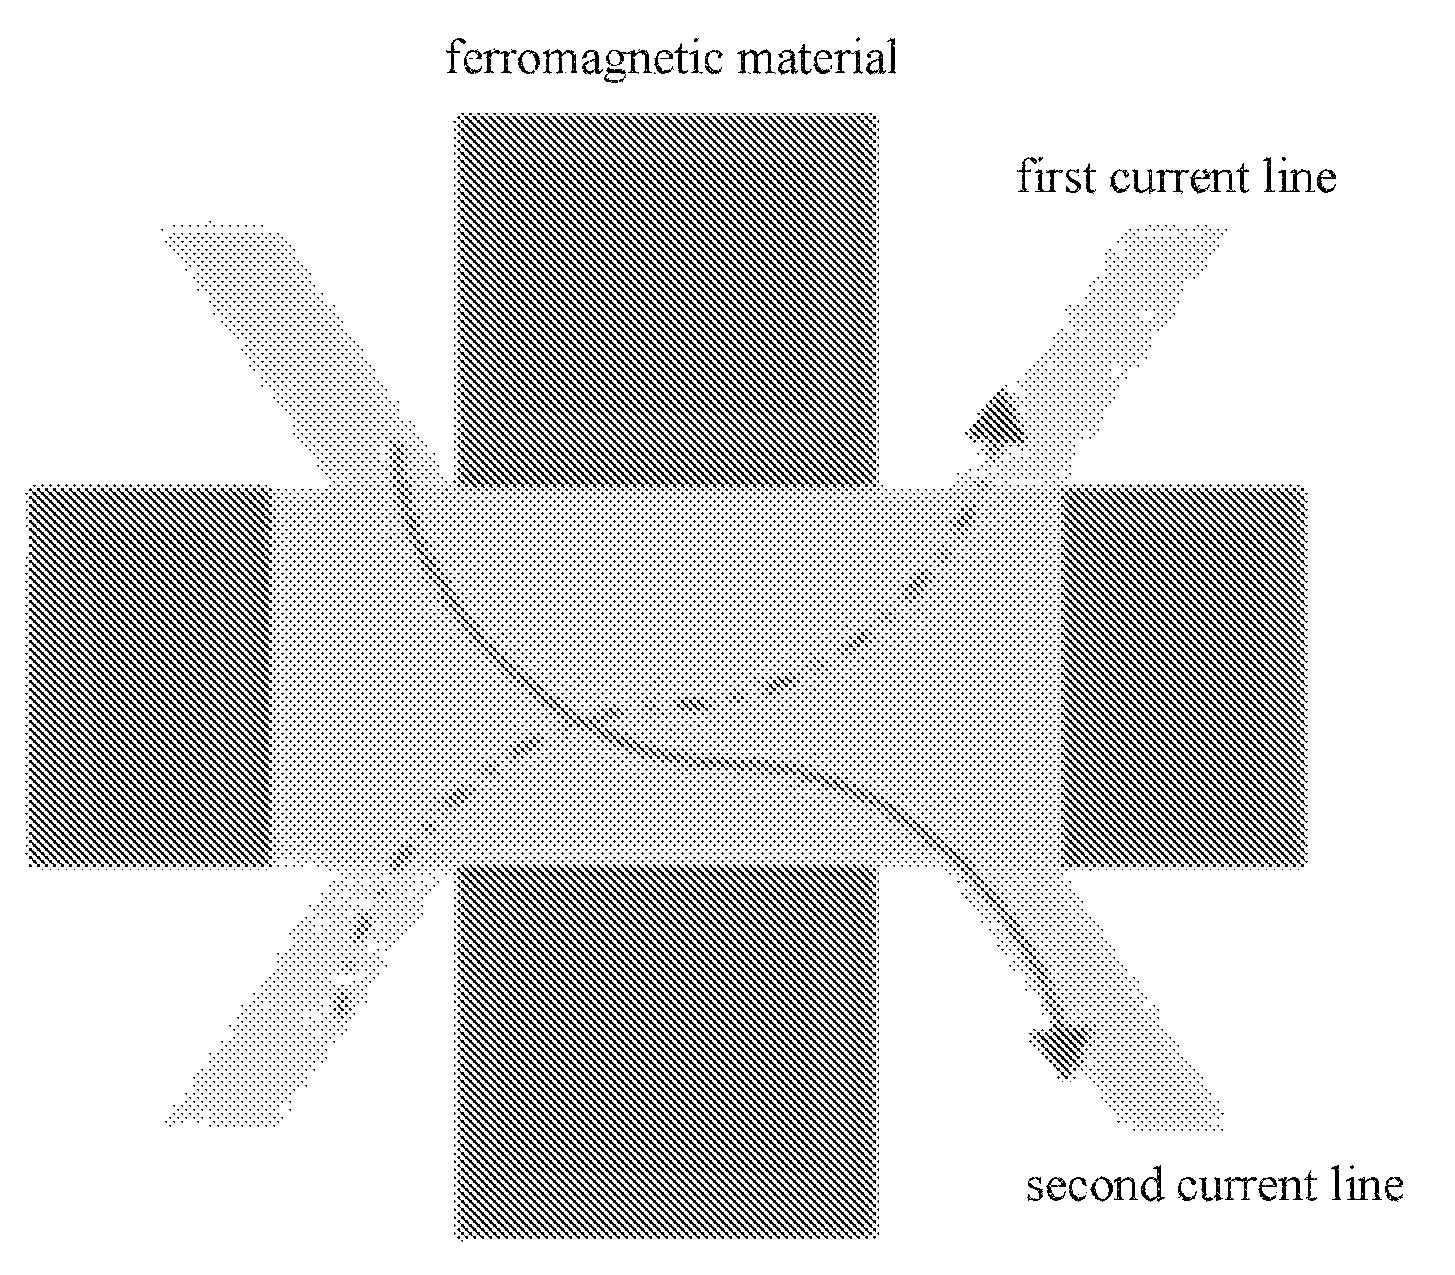 Magnetic memory device using domain structure and multi-state of ferromagnetic material